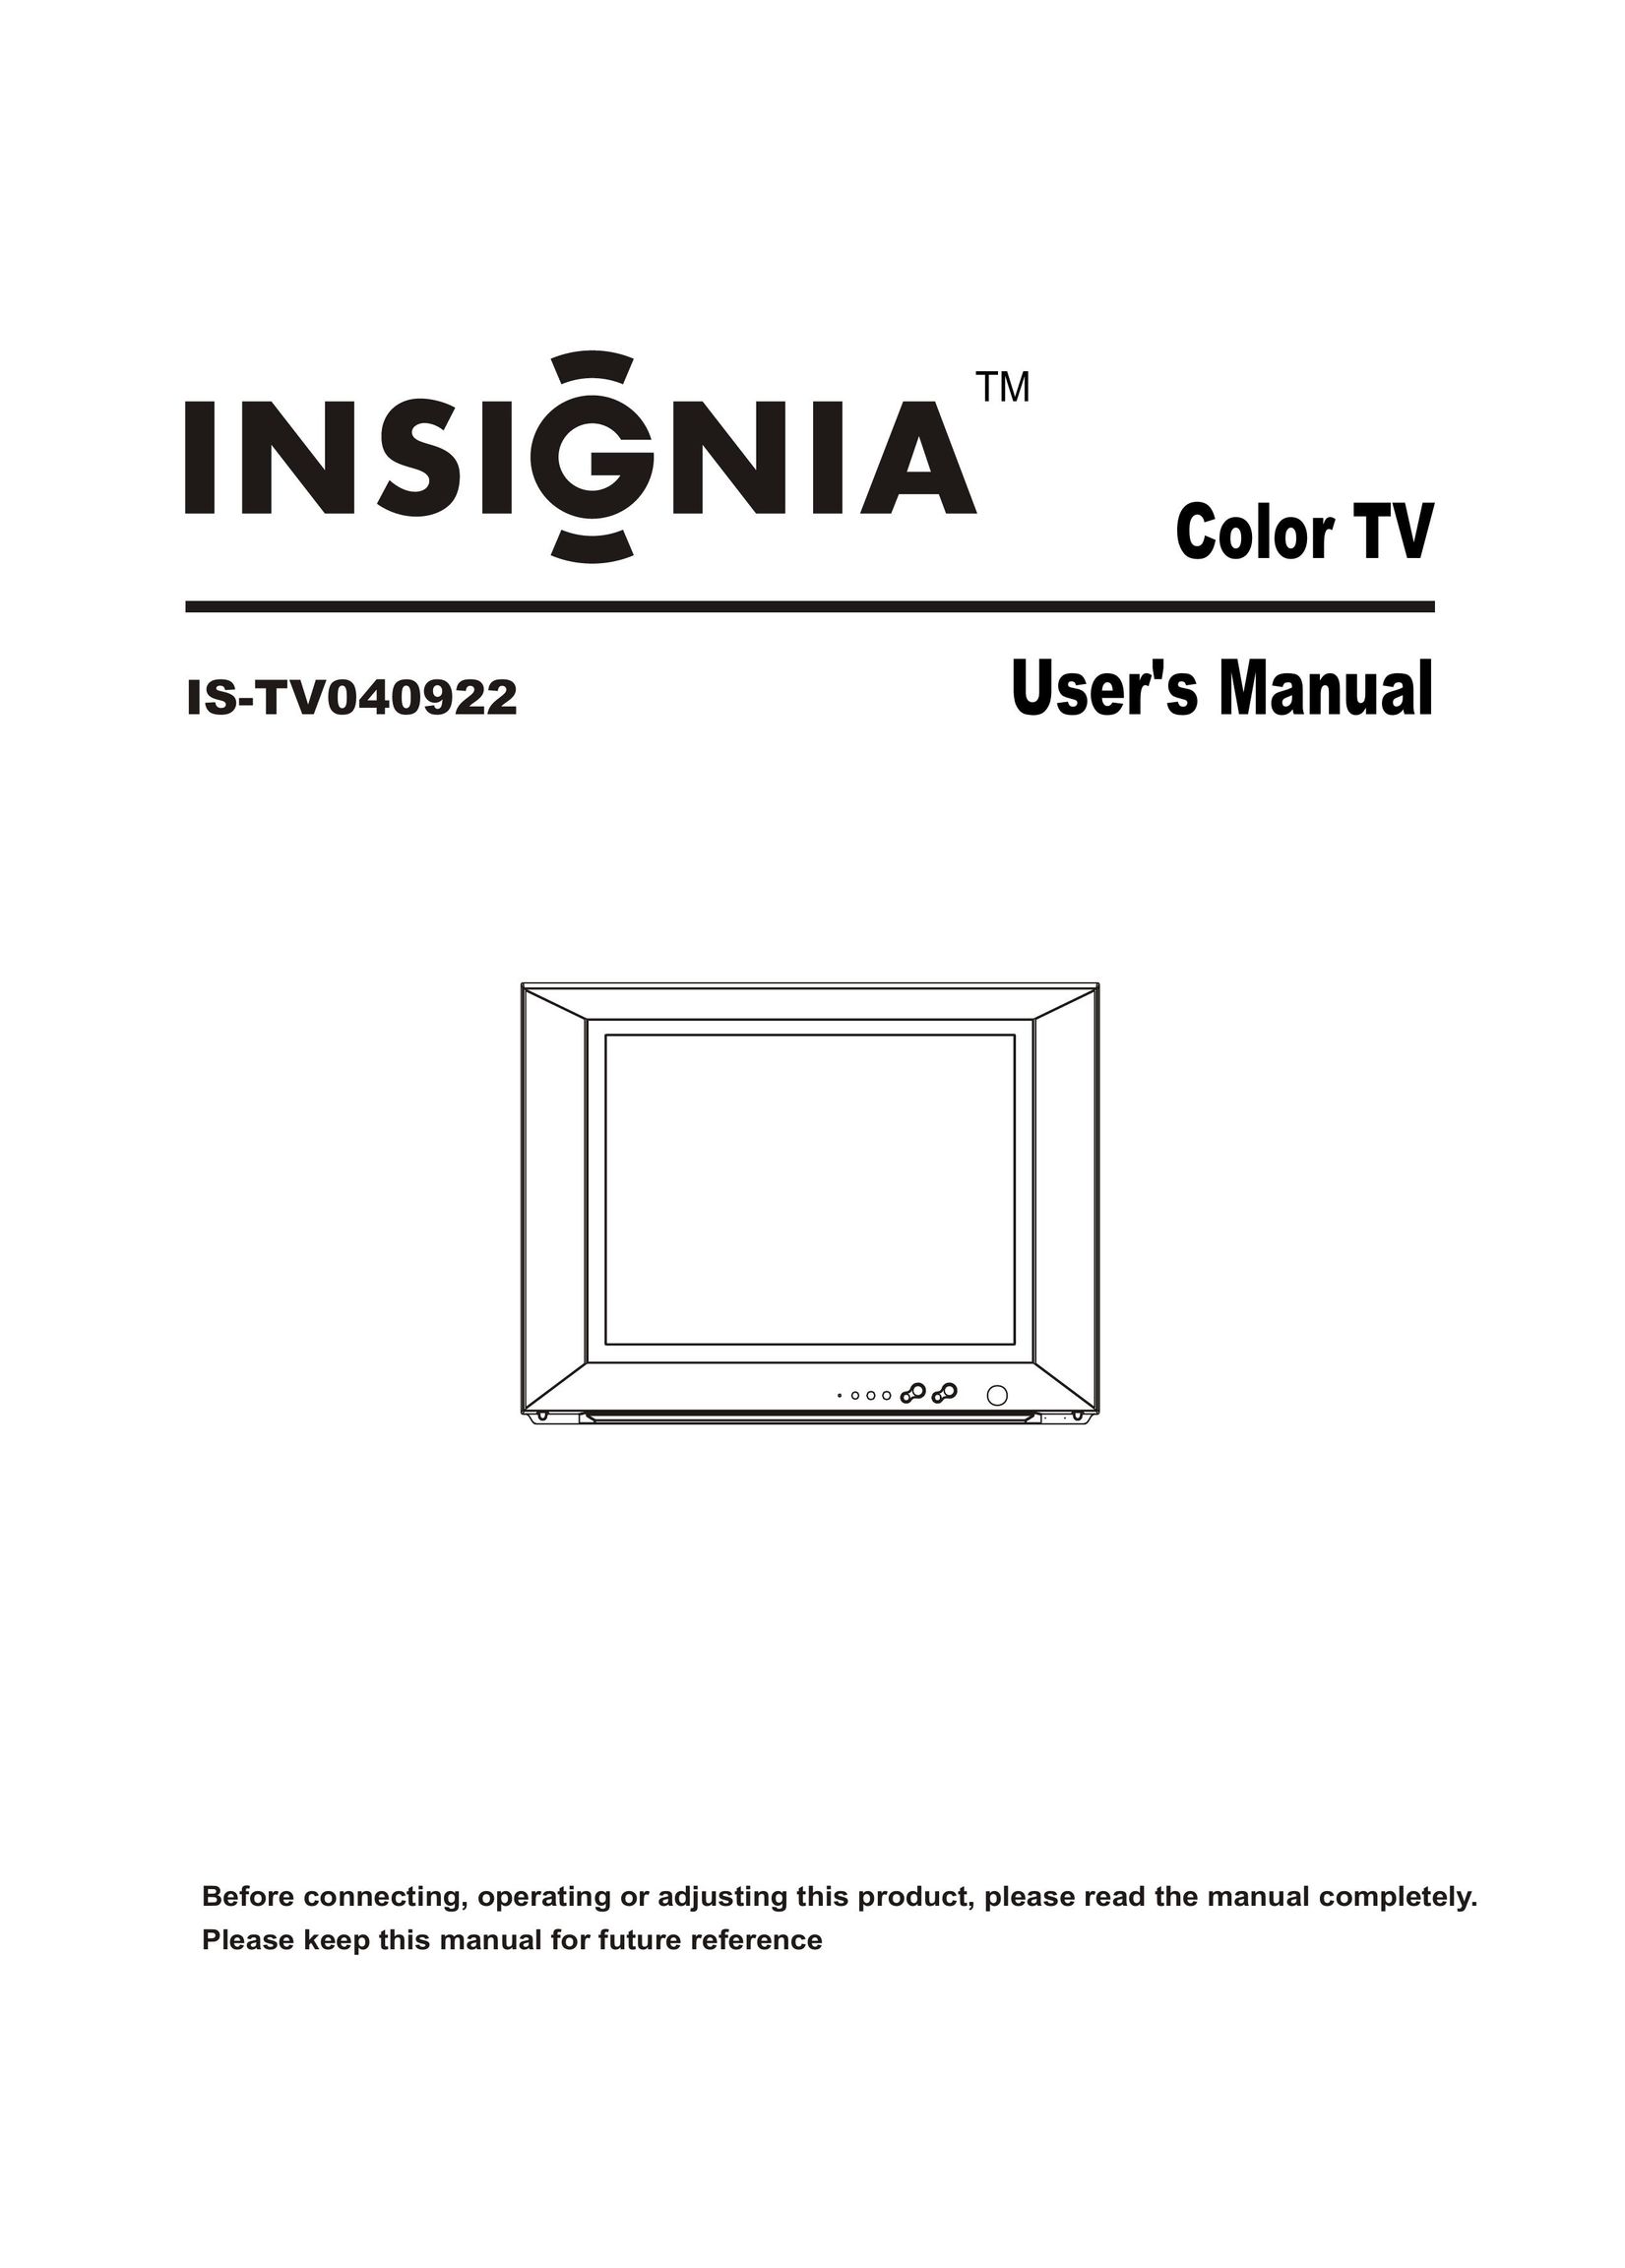 Insignia IS-TV040922 CRT Television User Manual